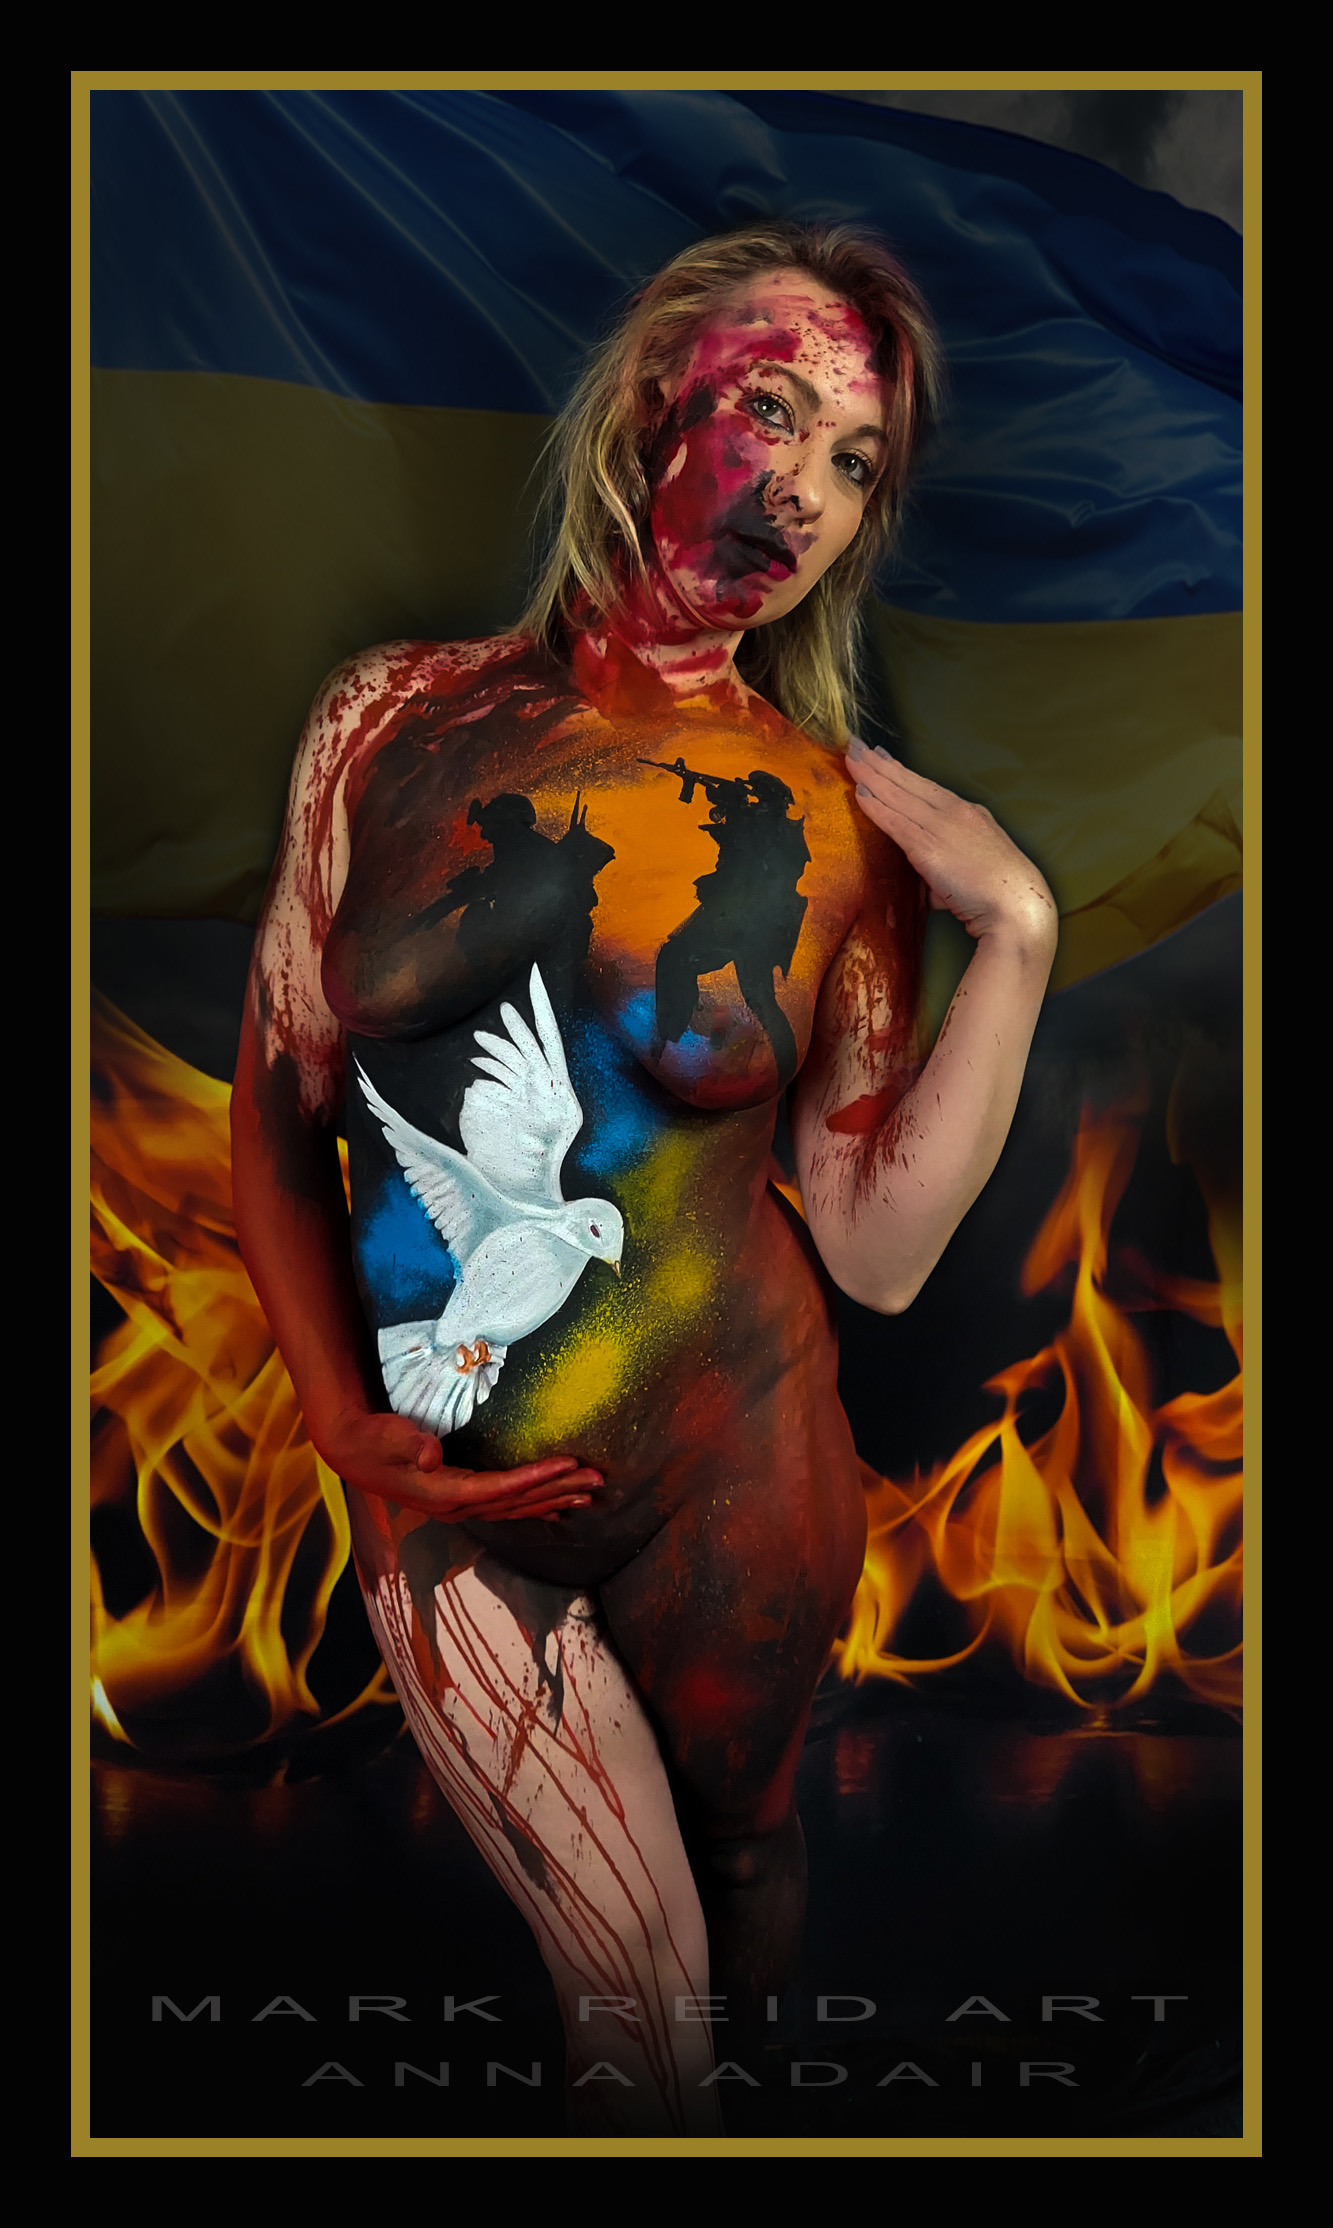 Full body painting of a woman that includes military figures in silhouette behind a bright white dove.  The woman's face and arms have been painting to look like gore